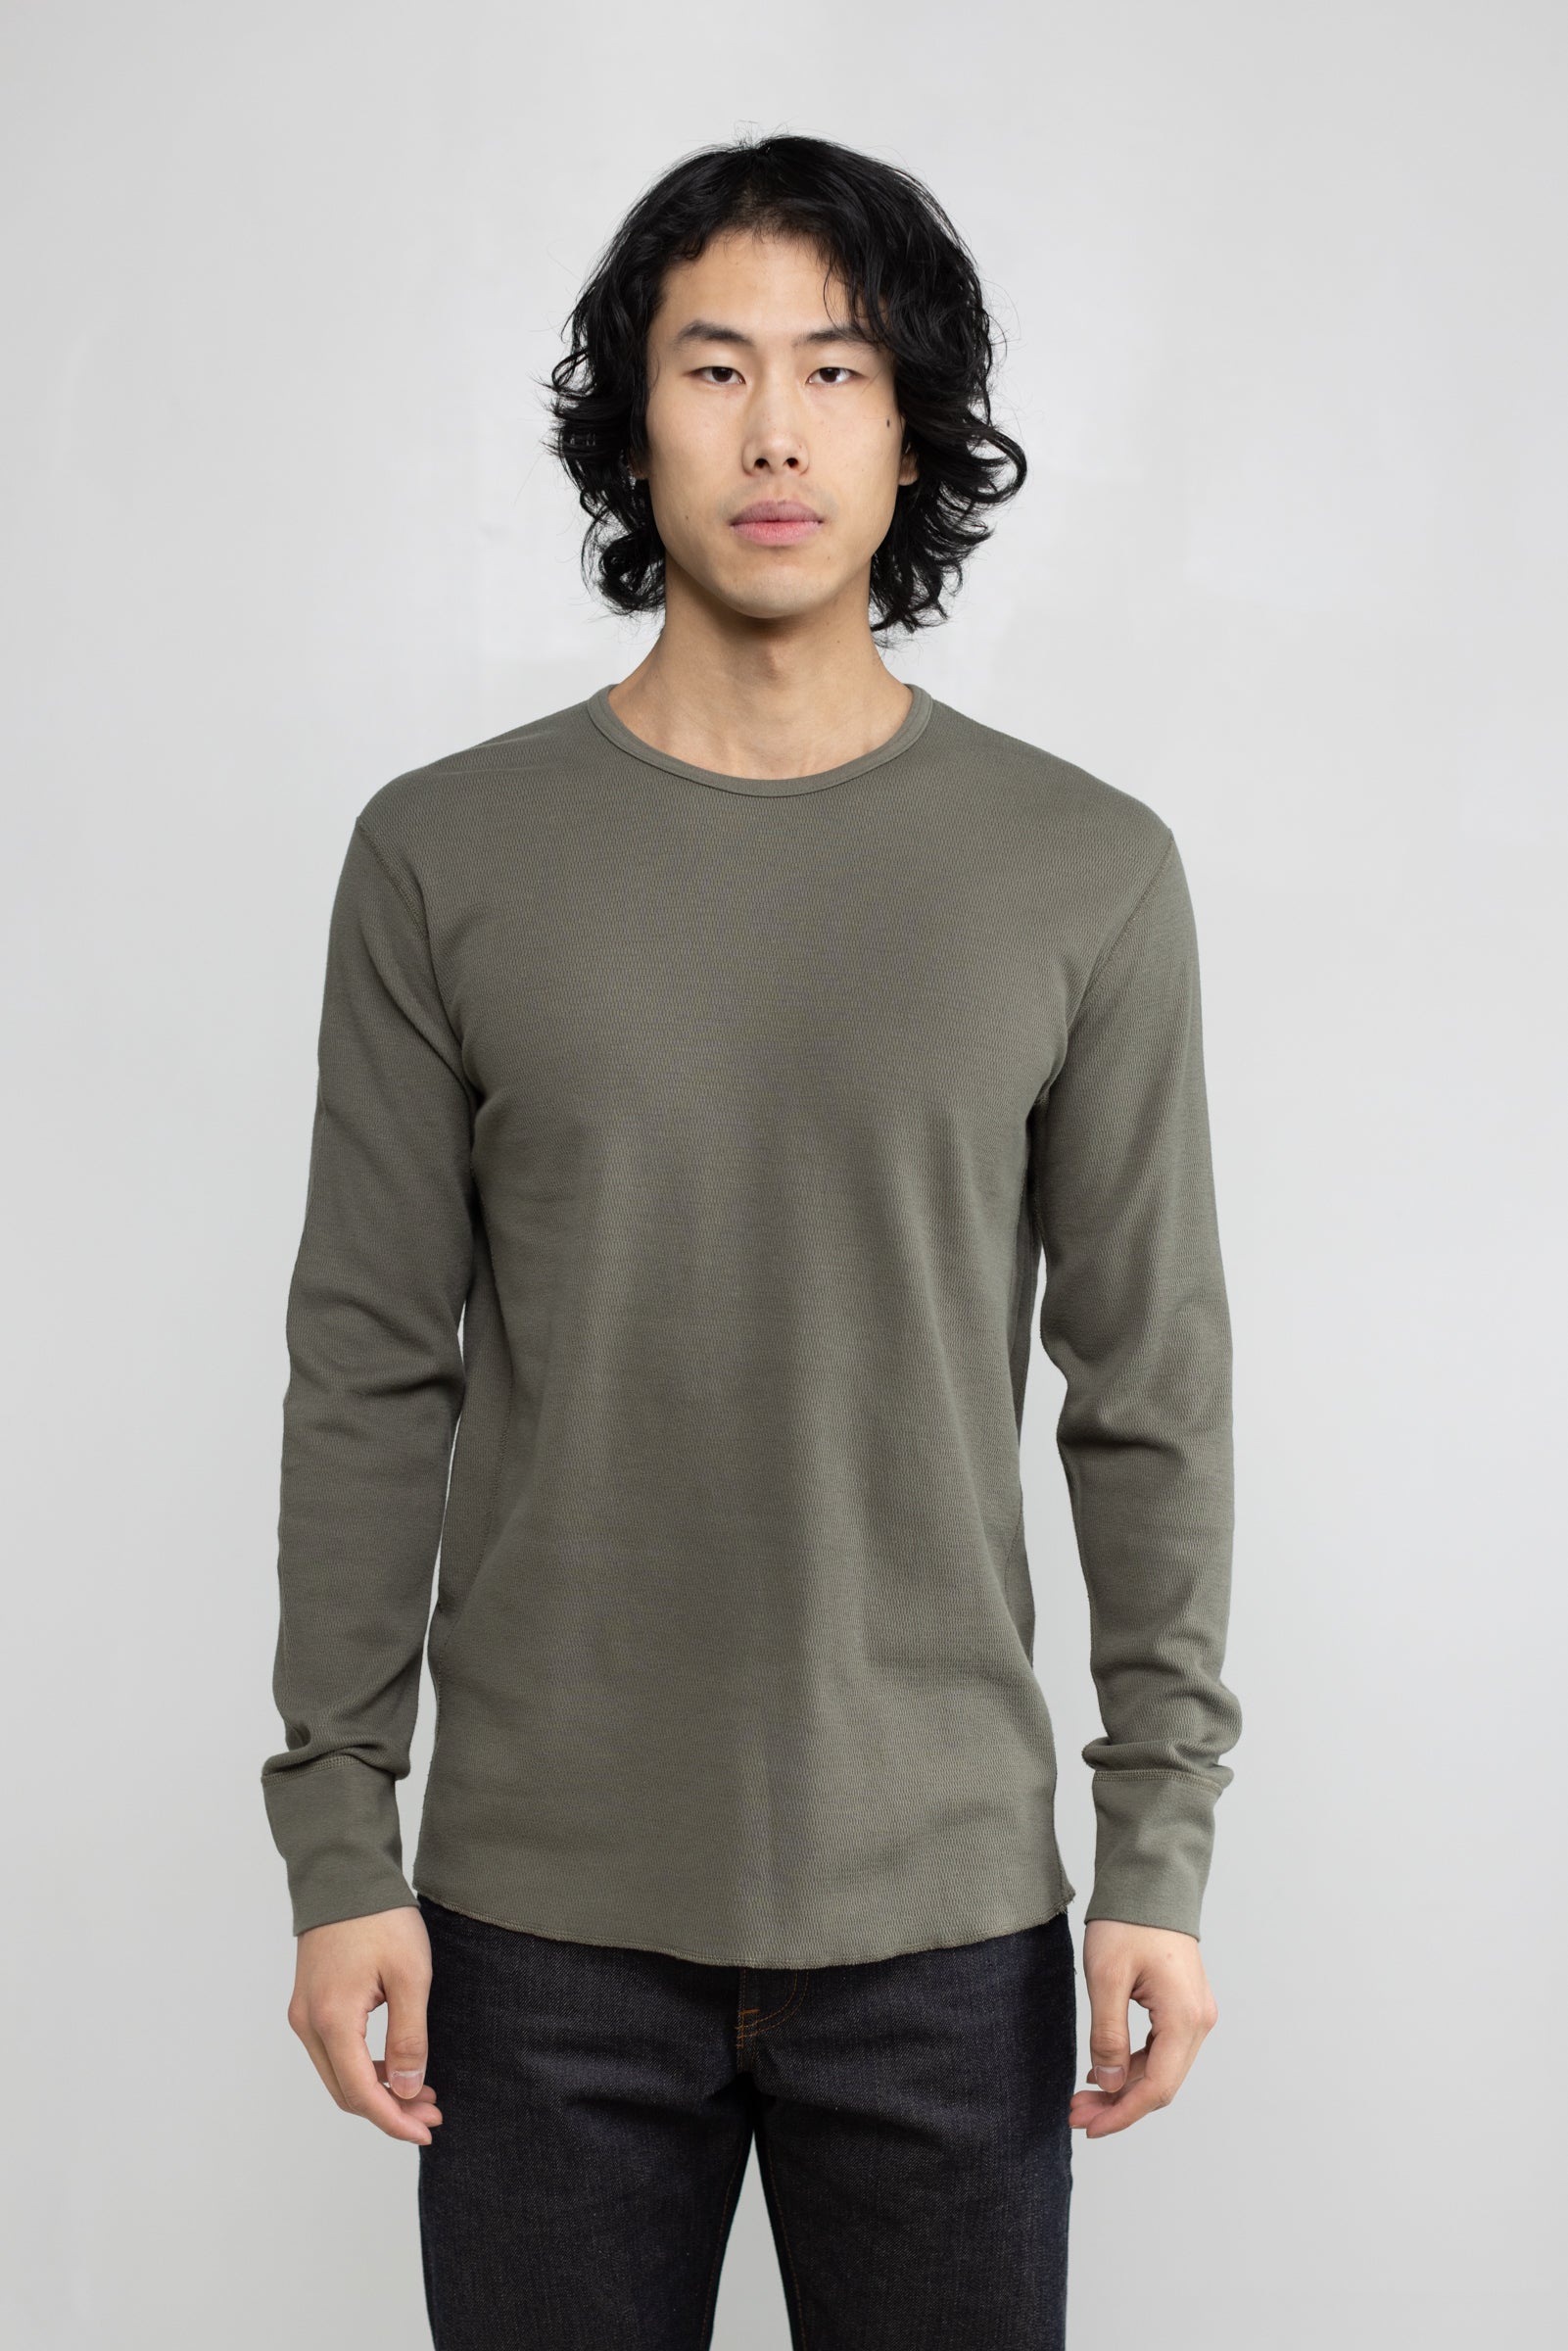 Mesh Thermal L/S Crew in Army Green 02